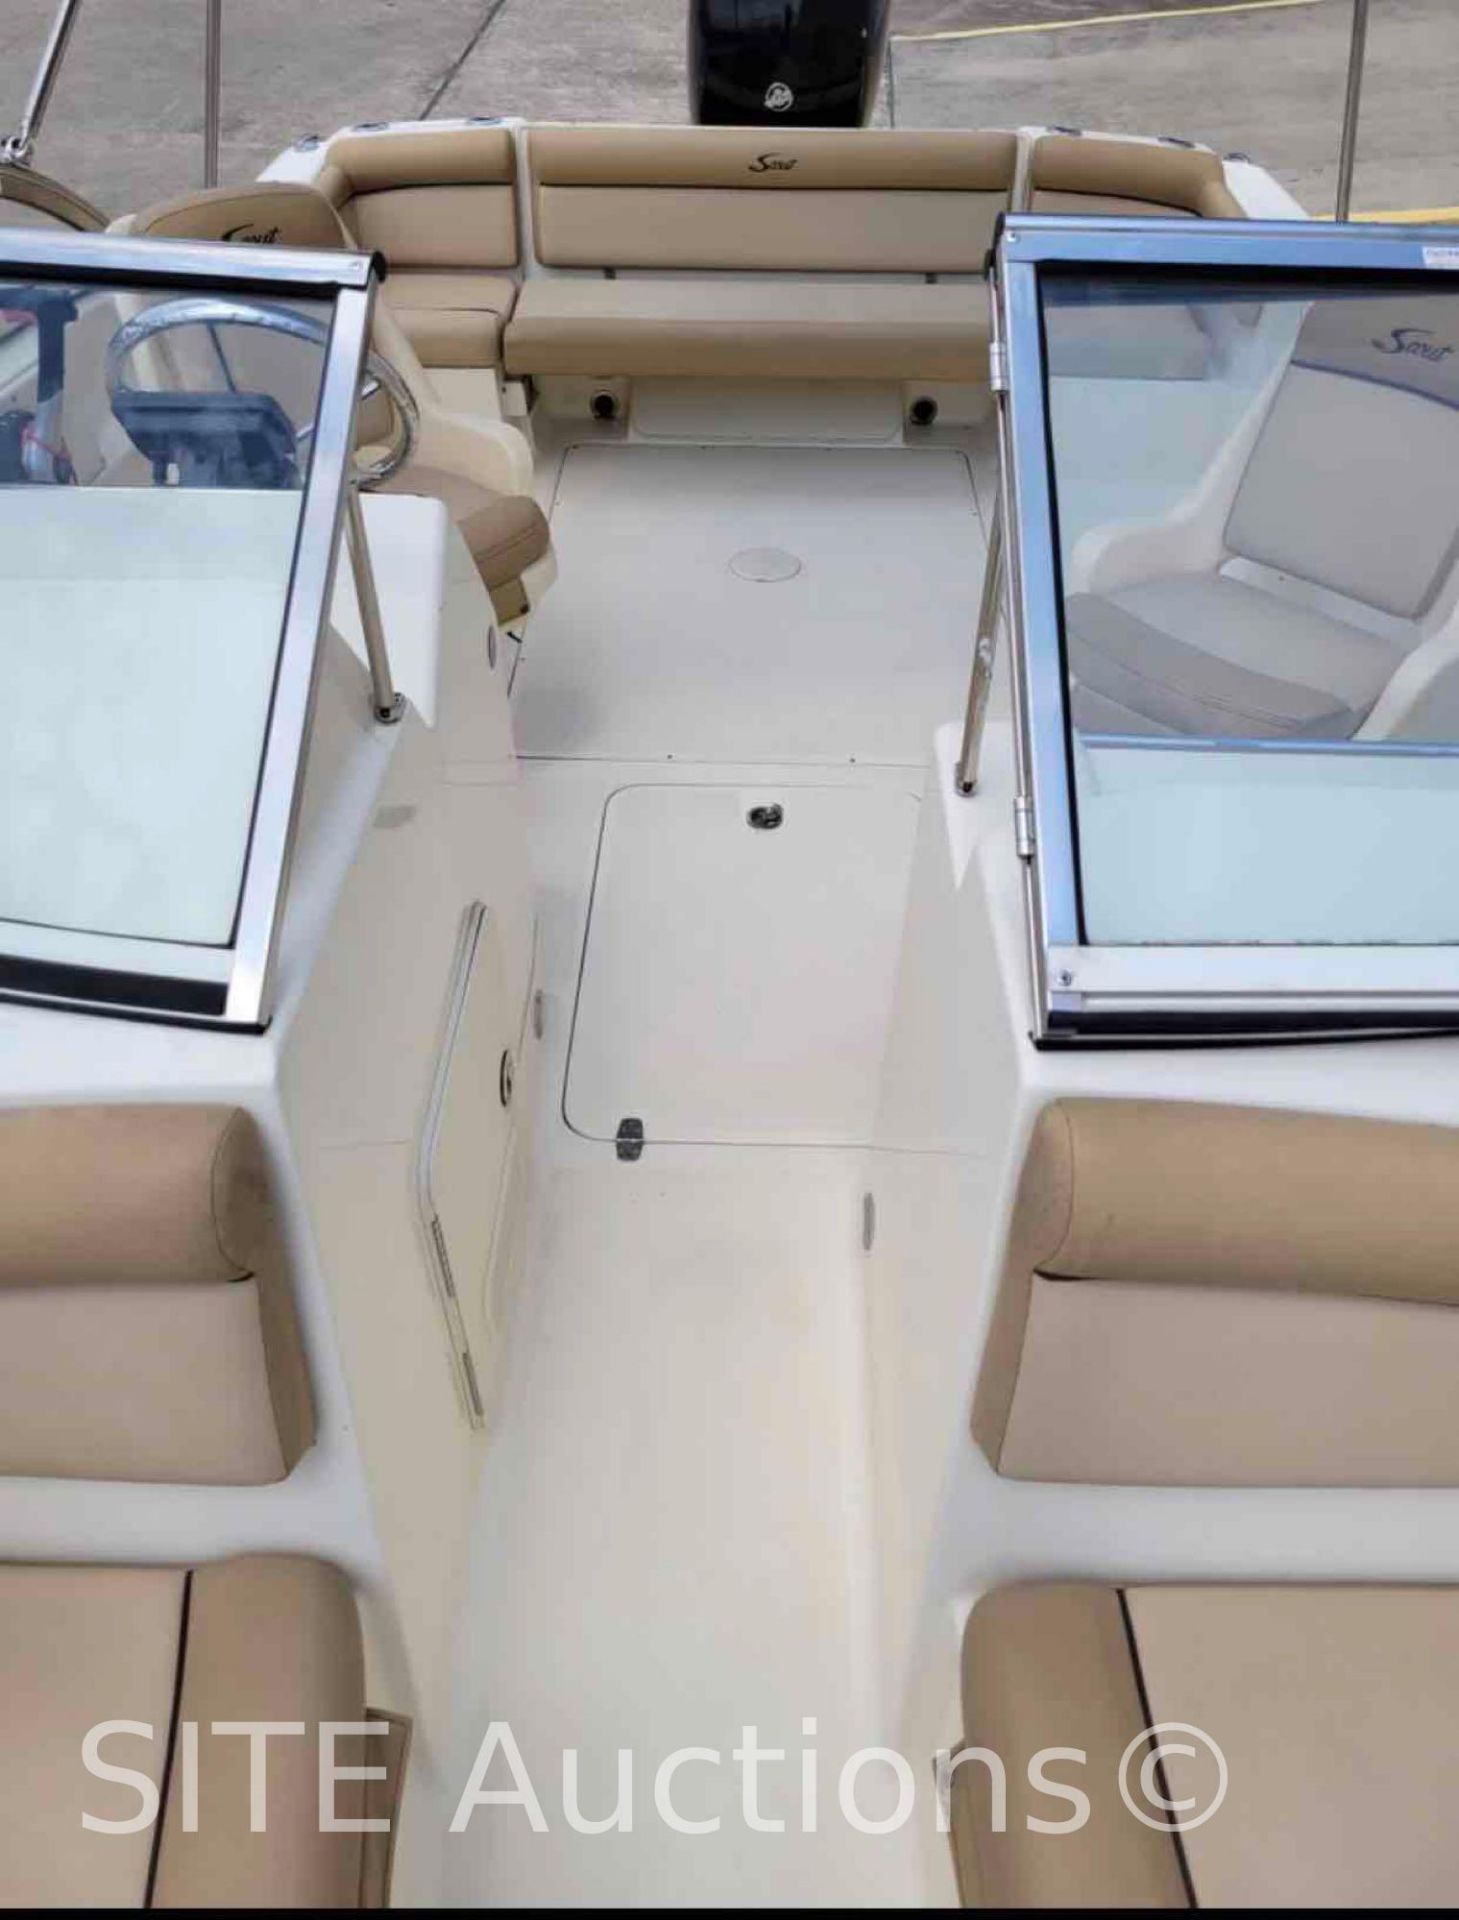 2020 Scout Dorado 20ft. Boat with Trailer - Image 6 of 9